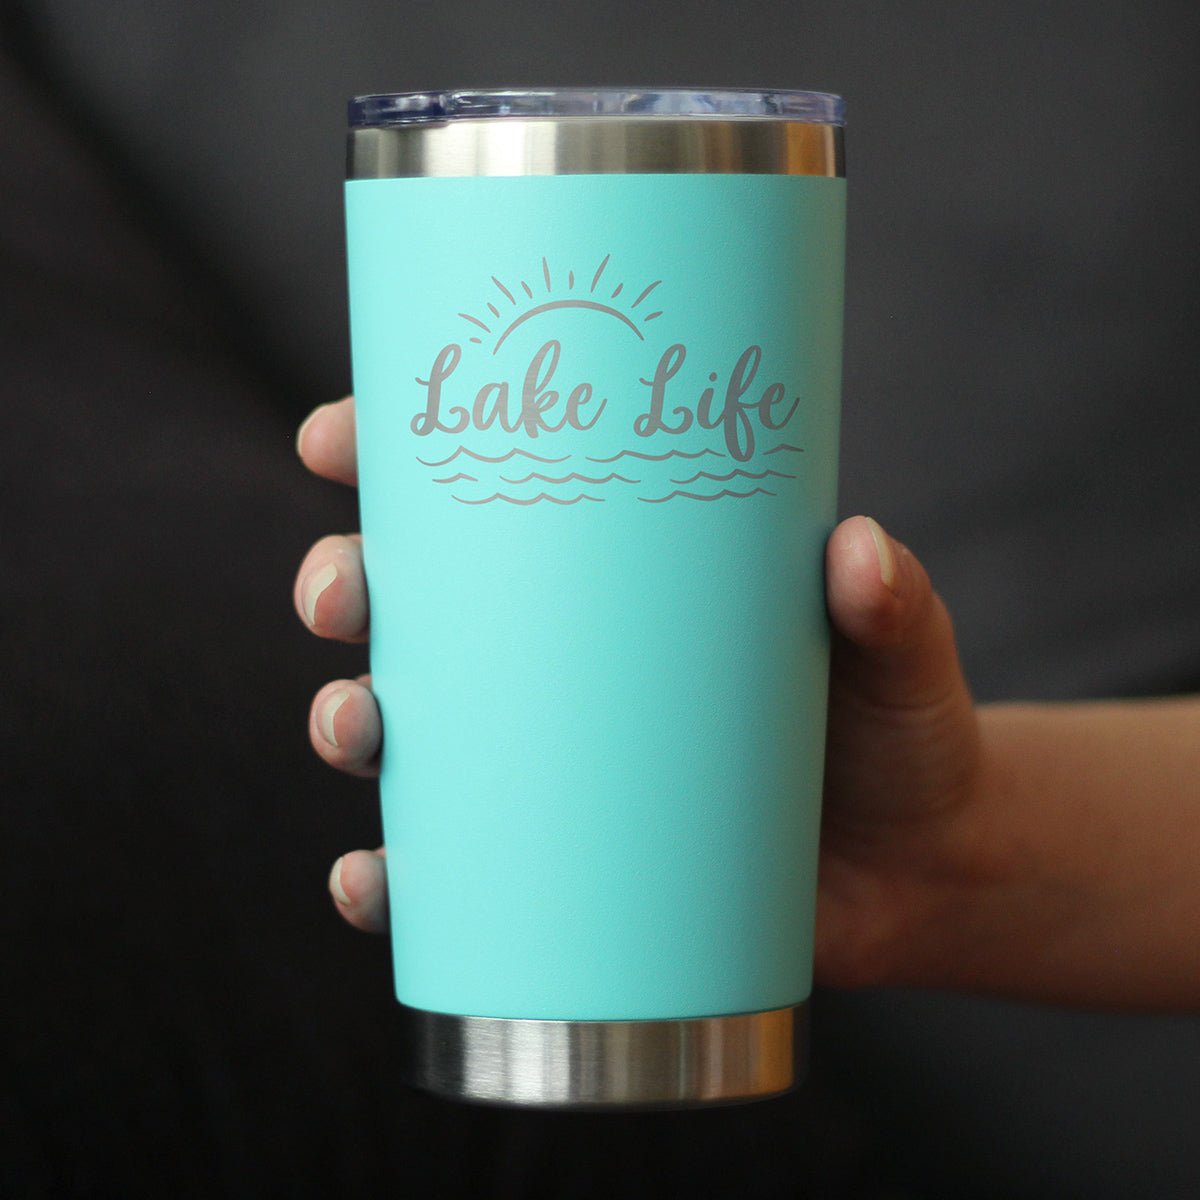 Lake Life - Insulated Coffee Tumbler Cup with Sliding Lid - Stainless Steel Insulated Mug - Cute Outdoor Camping Mug and Lake House Decor - Teal